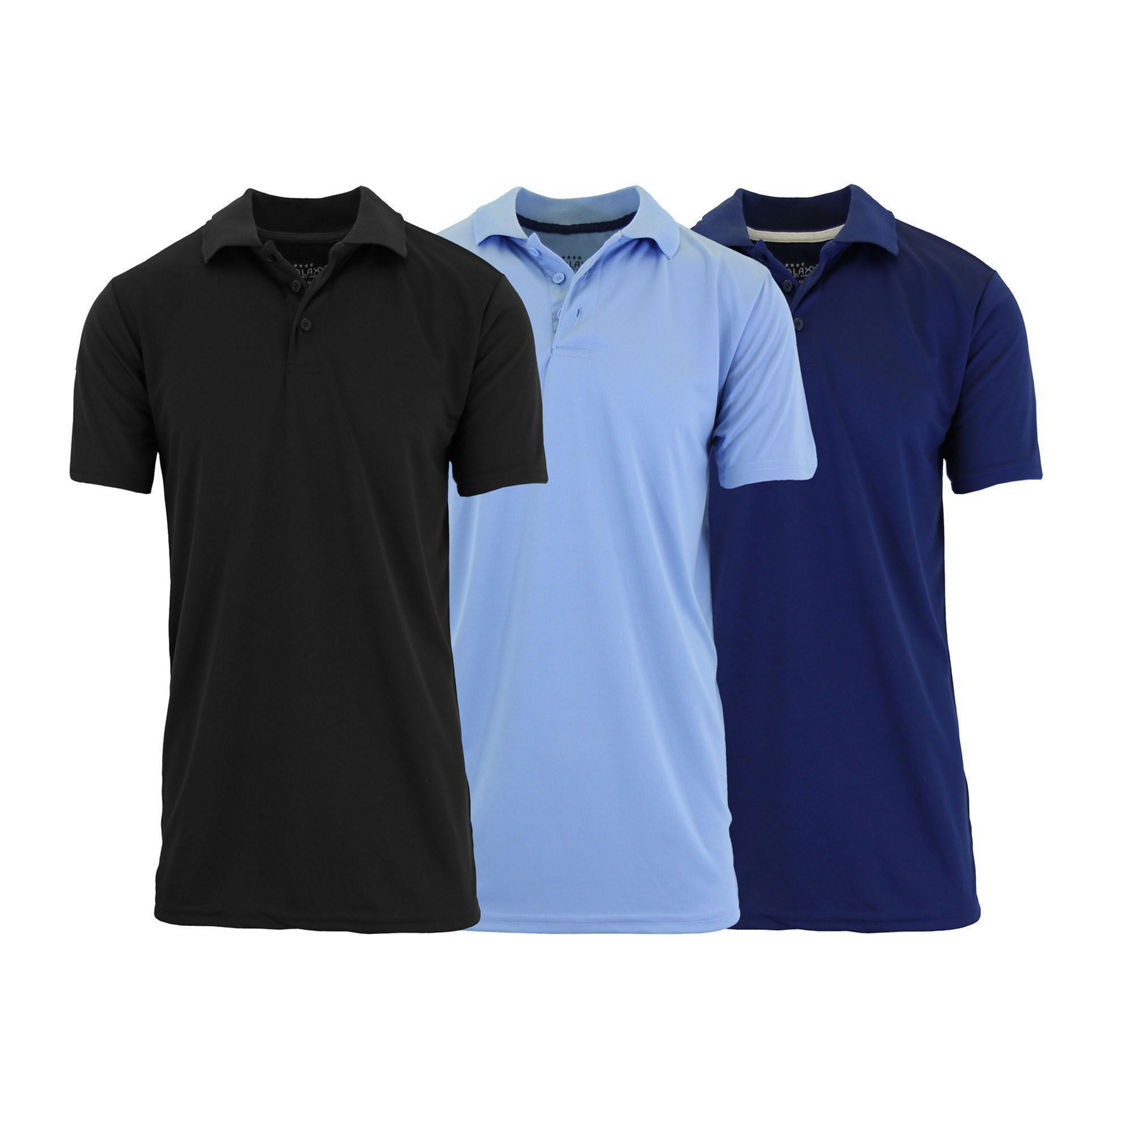 Galaxy By Harvic Men's Tagless Dry-fit Moisture-wicking Polo Shirt - 3 ...